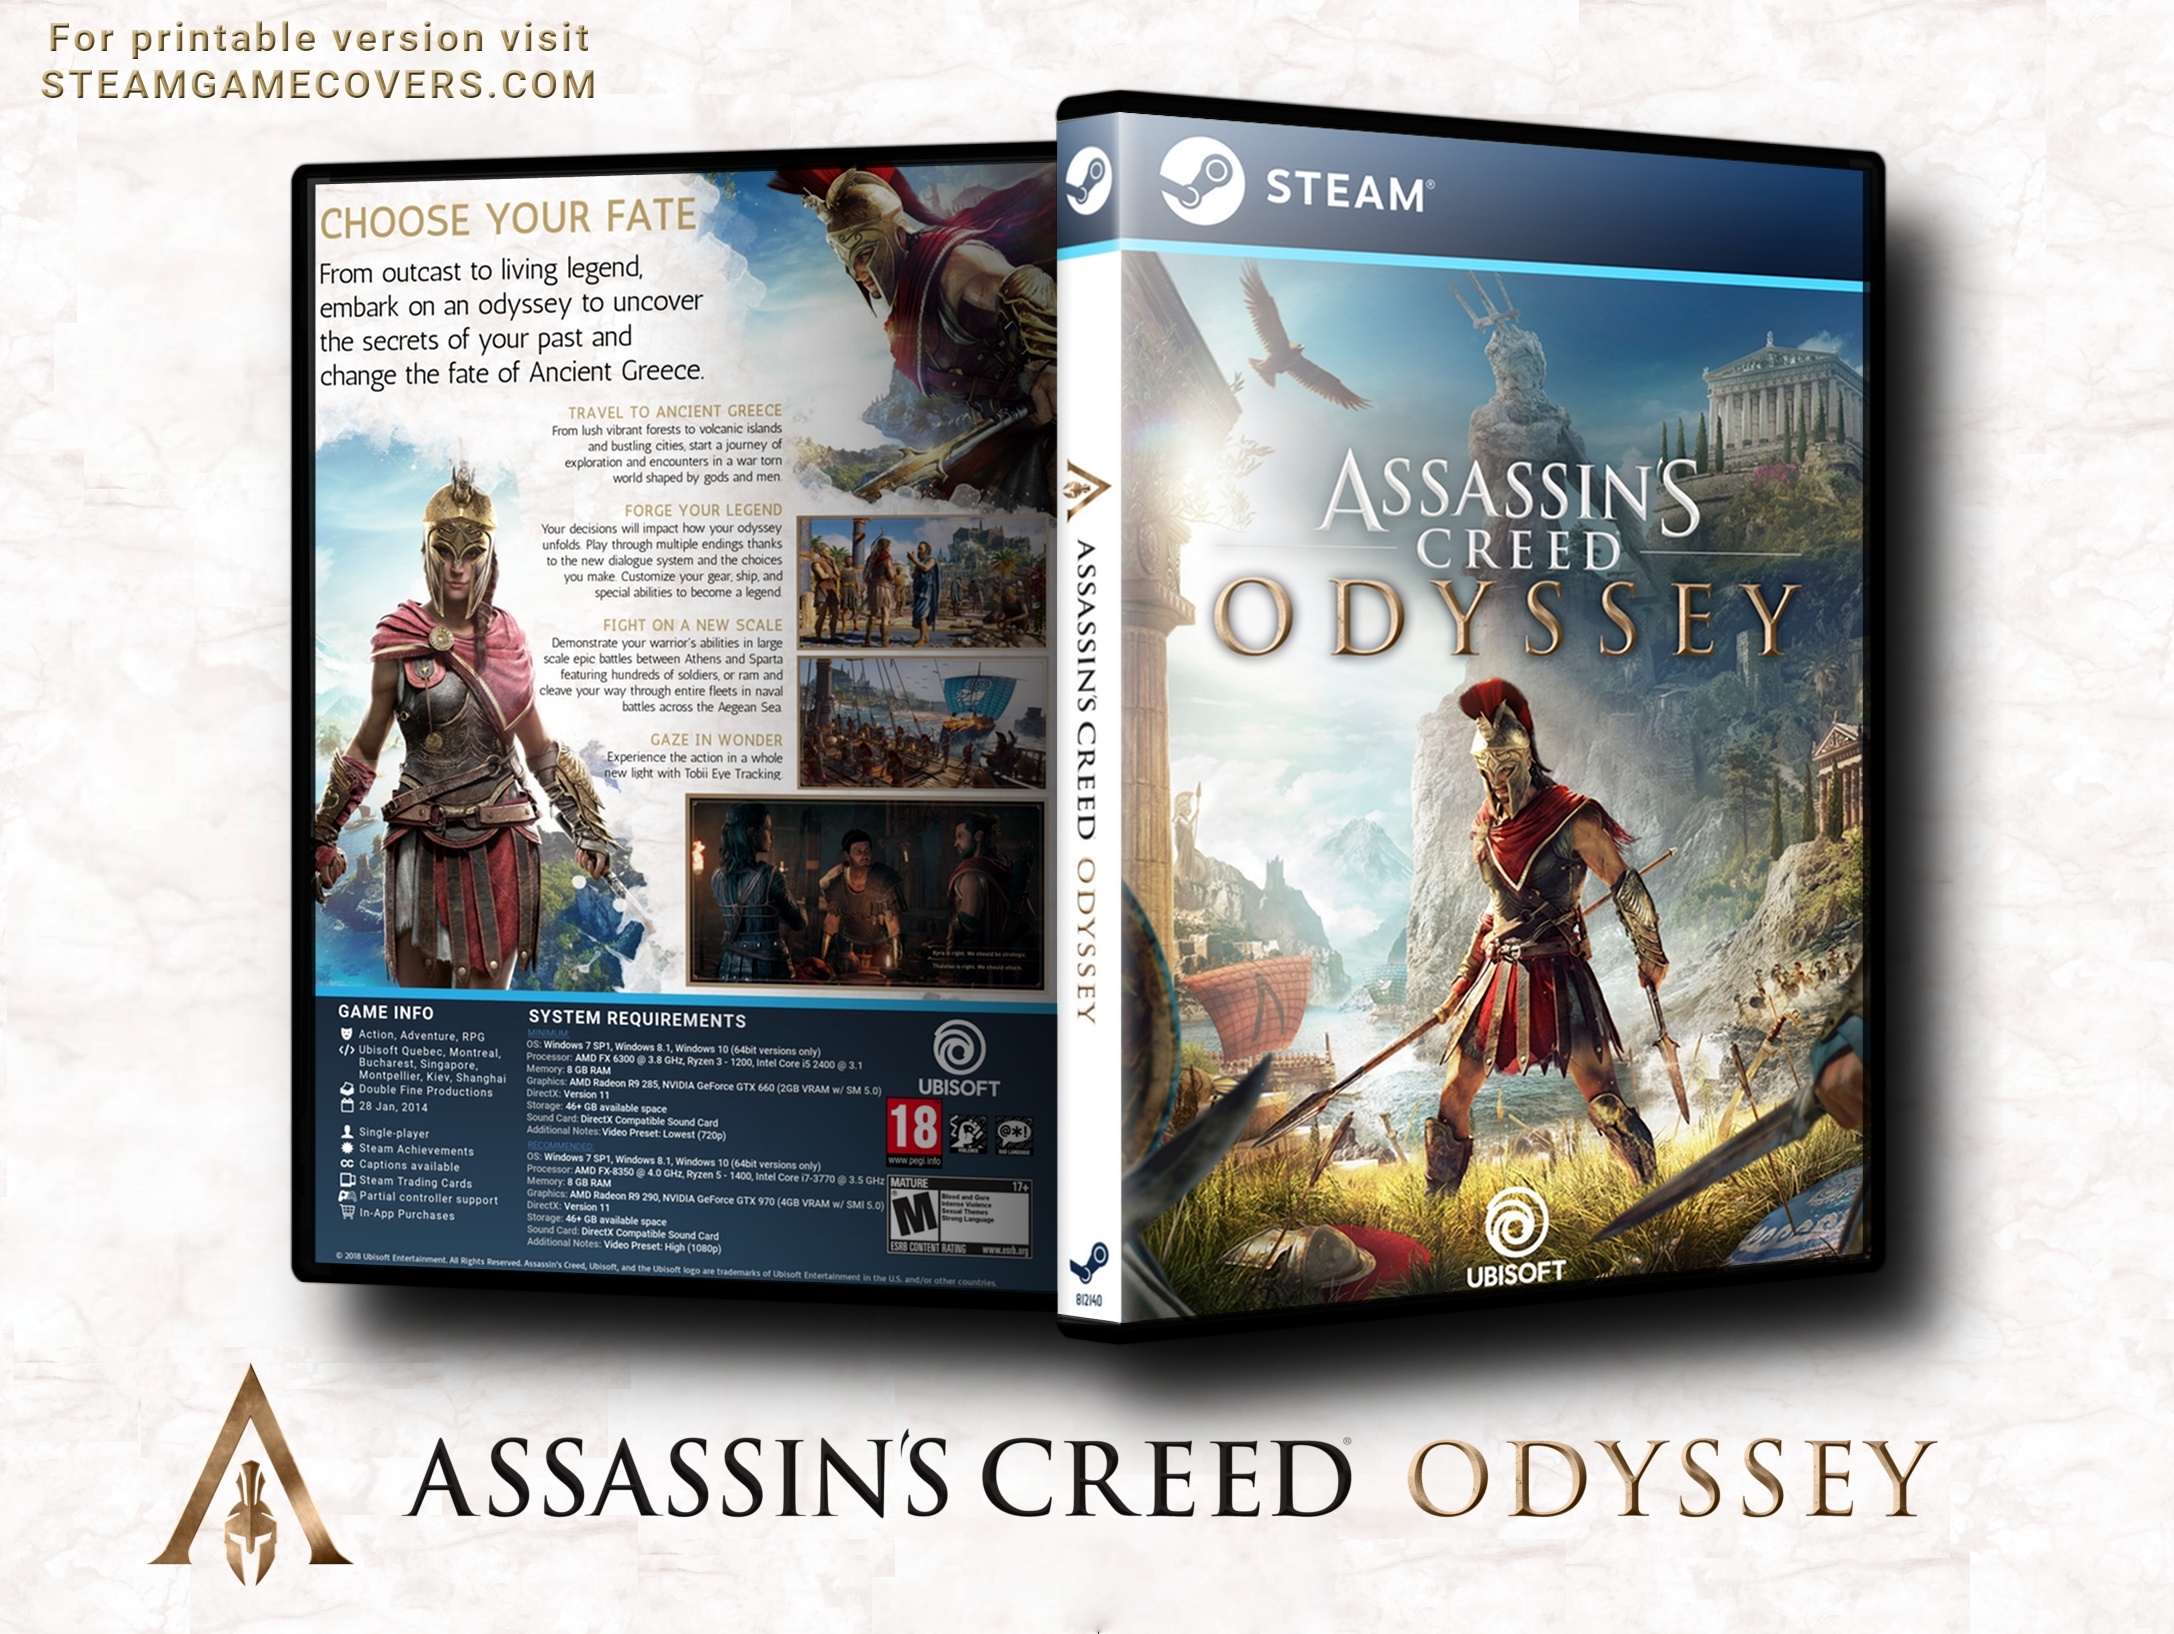 Assassin's Creed Odyssey box cover